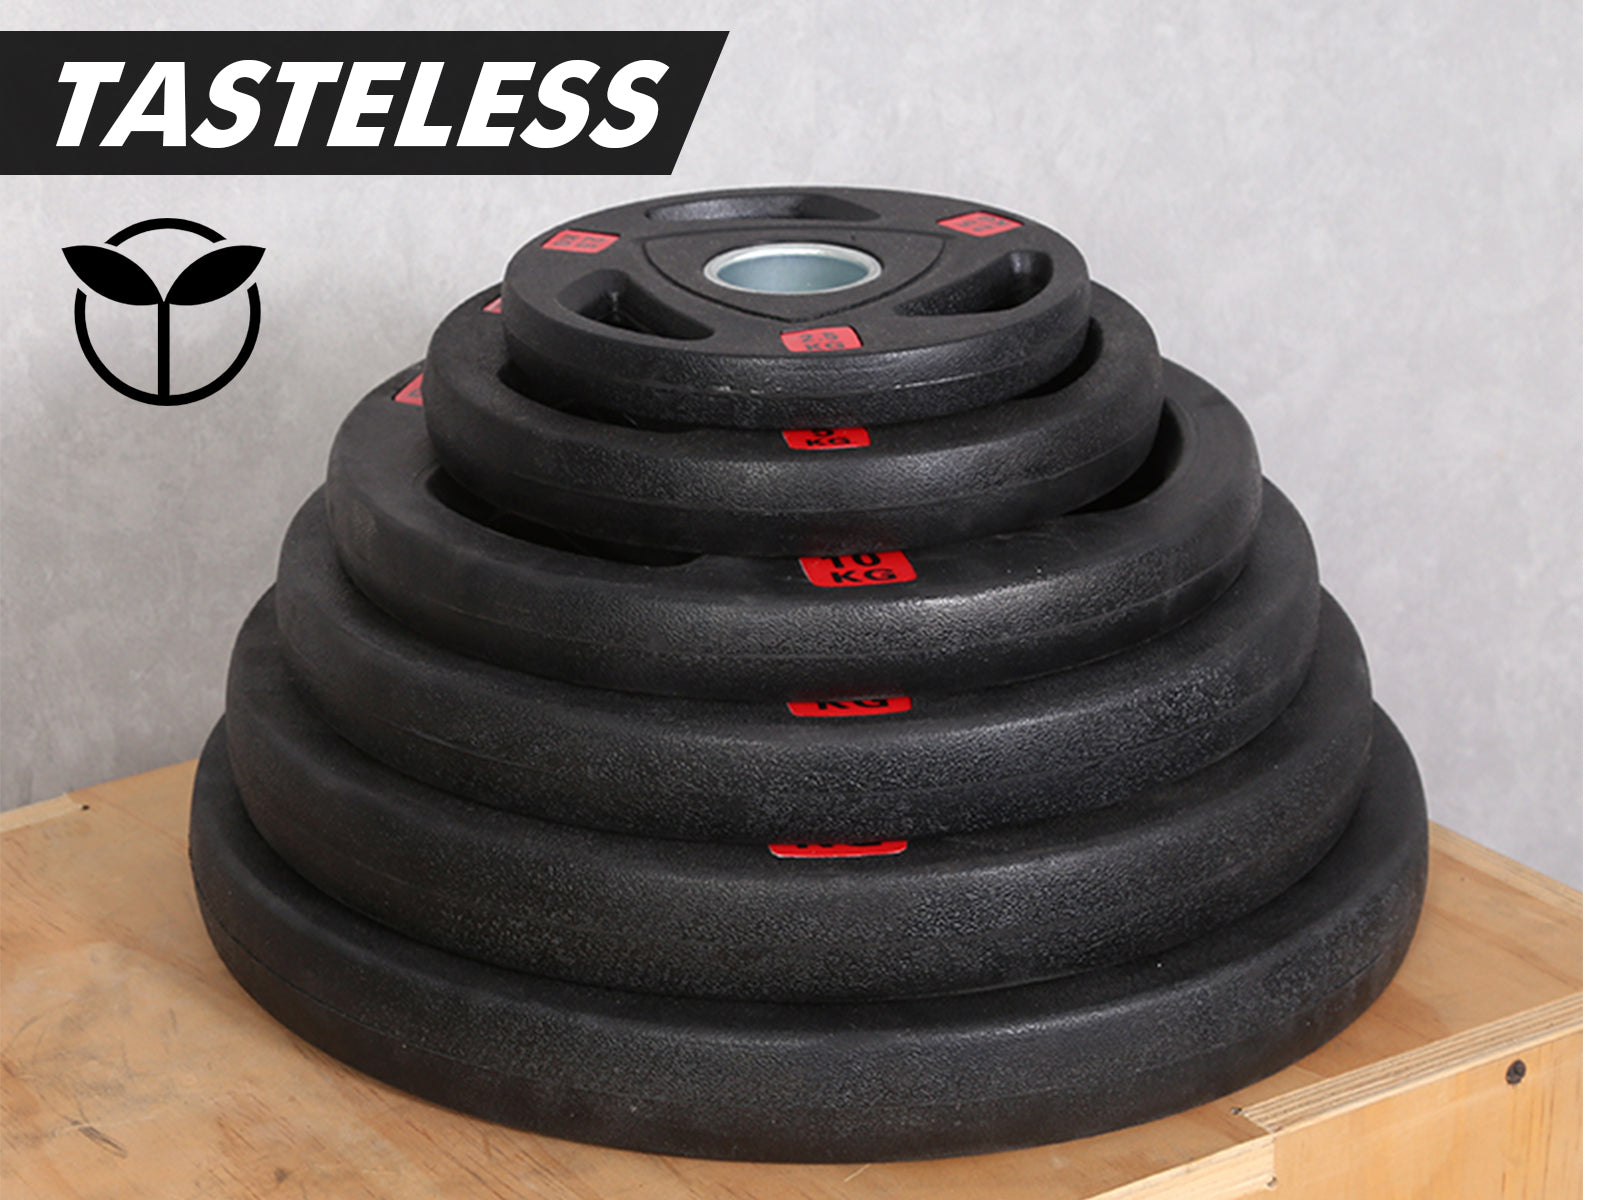 Rubber Weight Plate 5KG x 4